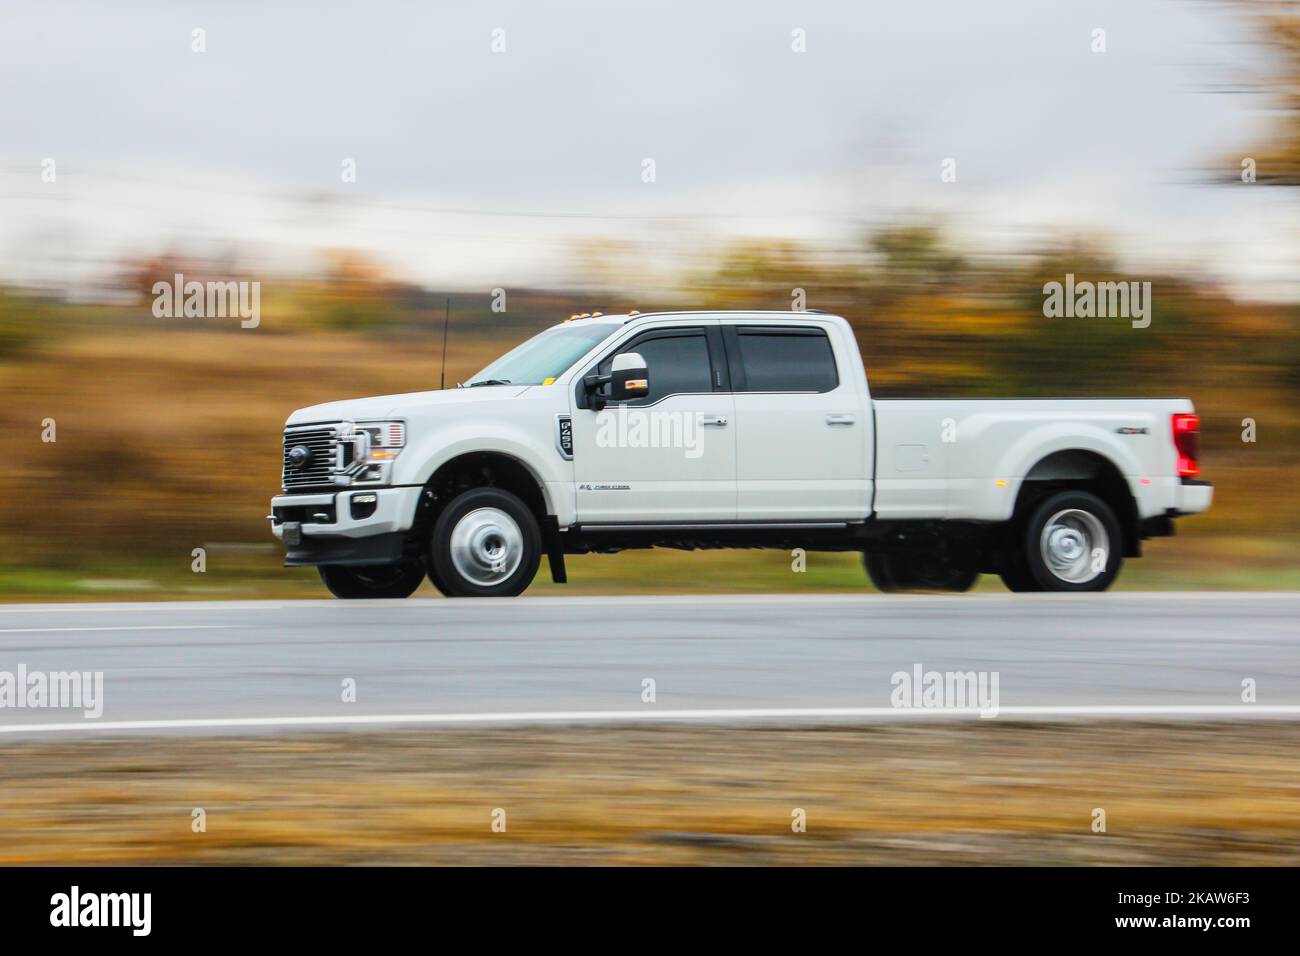 A white Ford Truck on a road against blur background Stock Photo